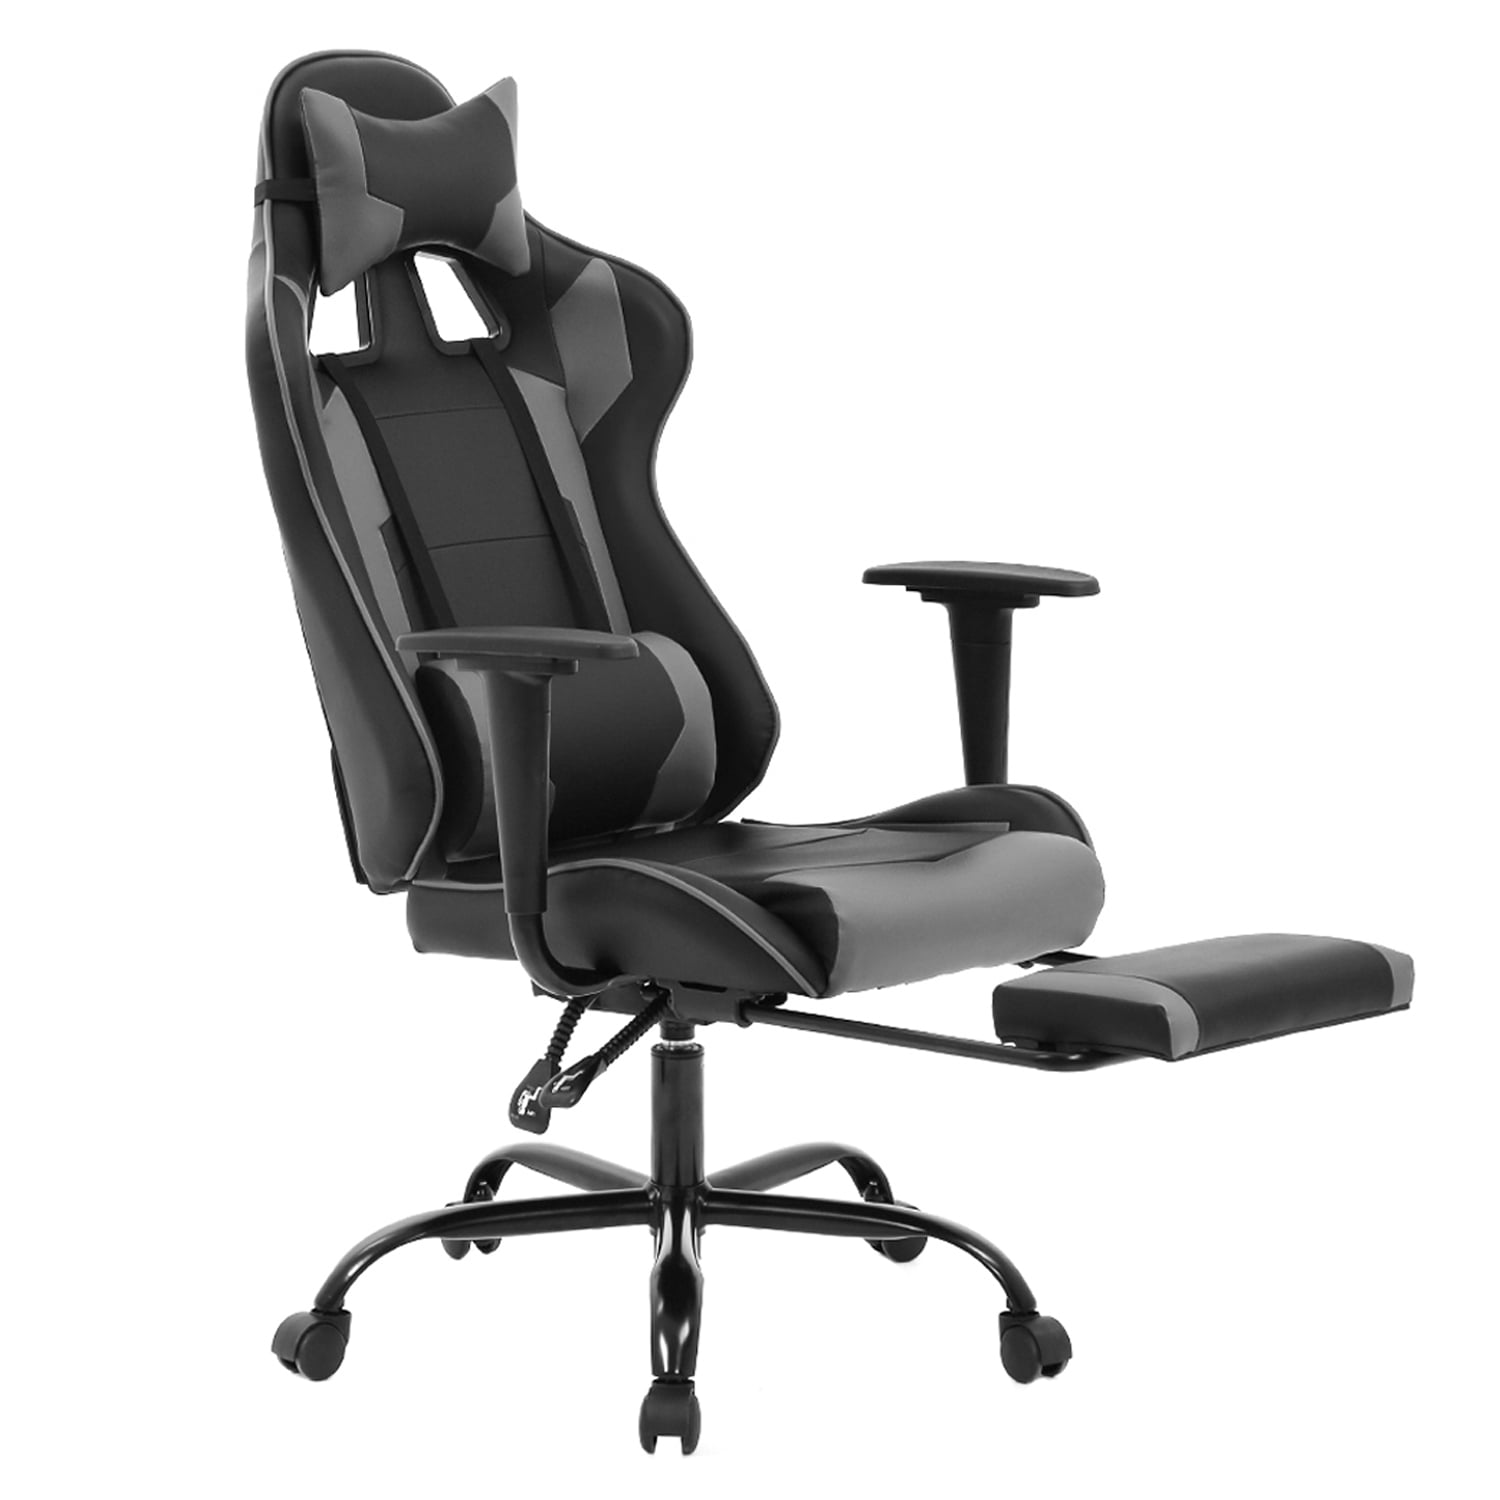 Details about   Office Gaming Chair Ergonomic Executive Computer Desk Chair Swivel PU Leather 